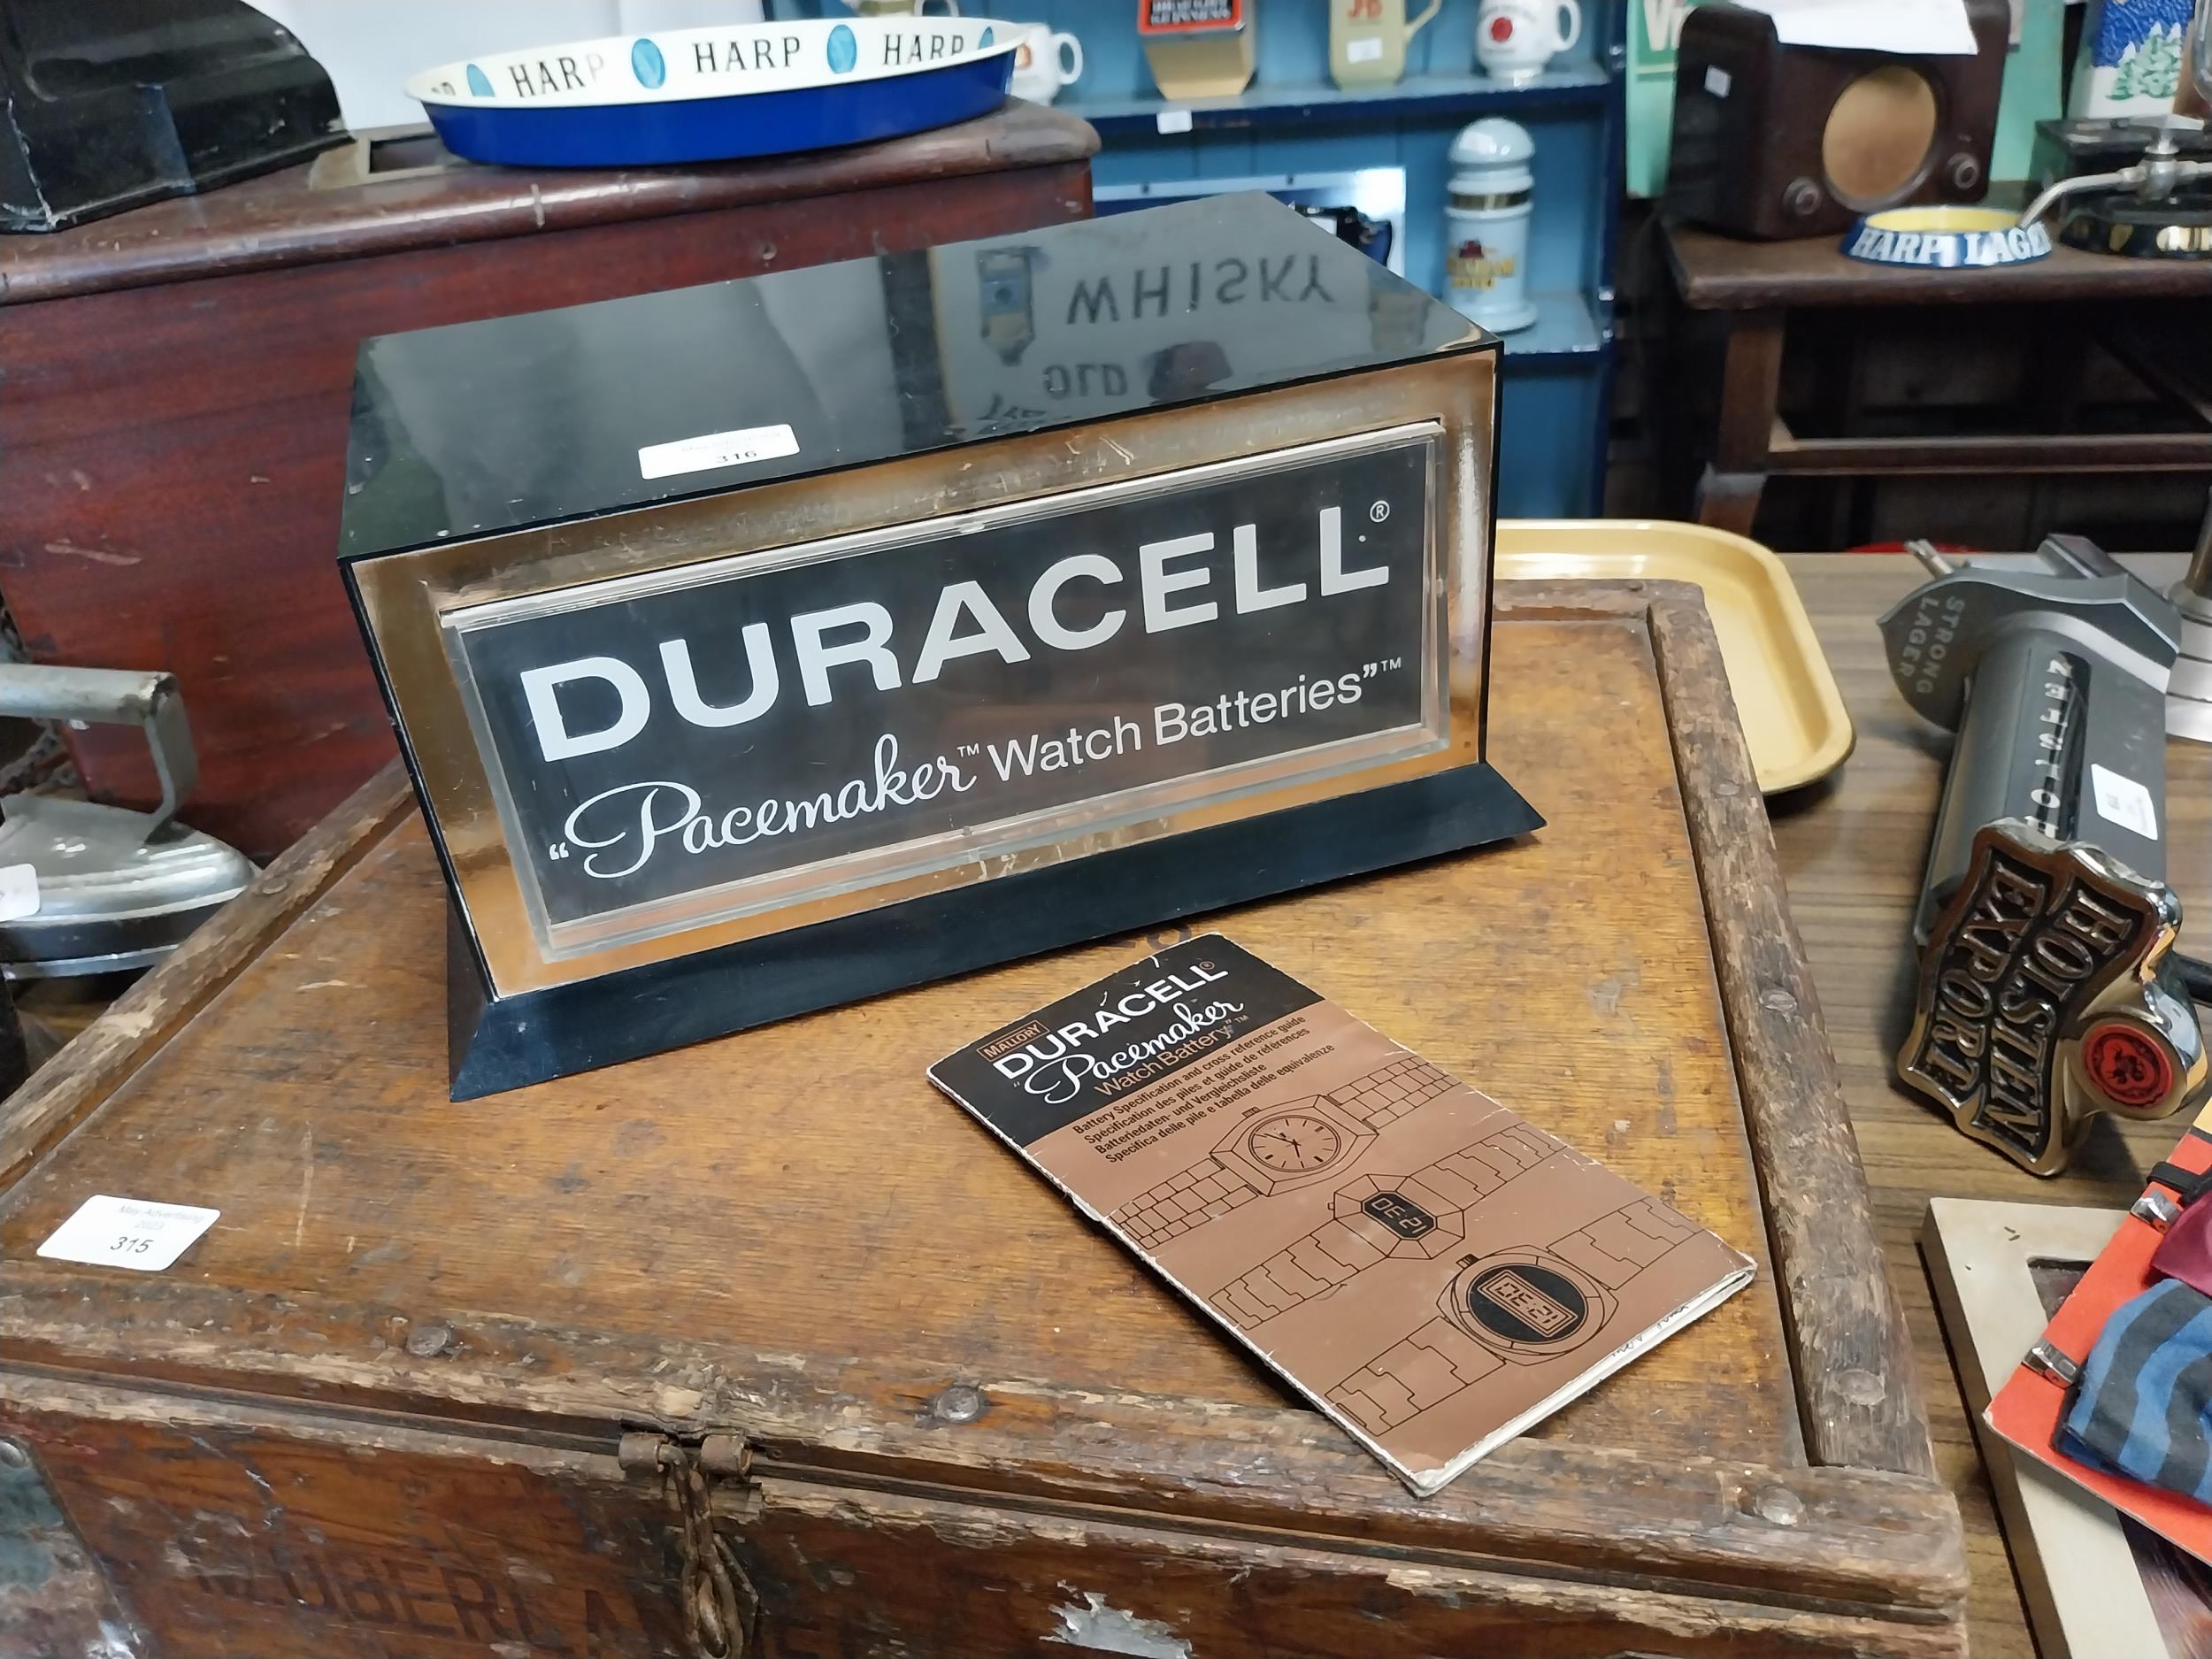 Duracell Pacemaker Watch Batteries Perspex counter display box. {16 cm h x 32 cm W x 20 cm D}.